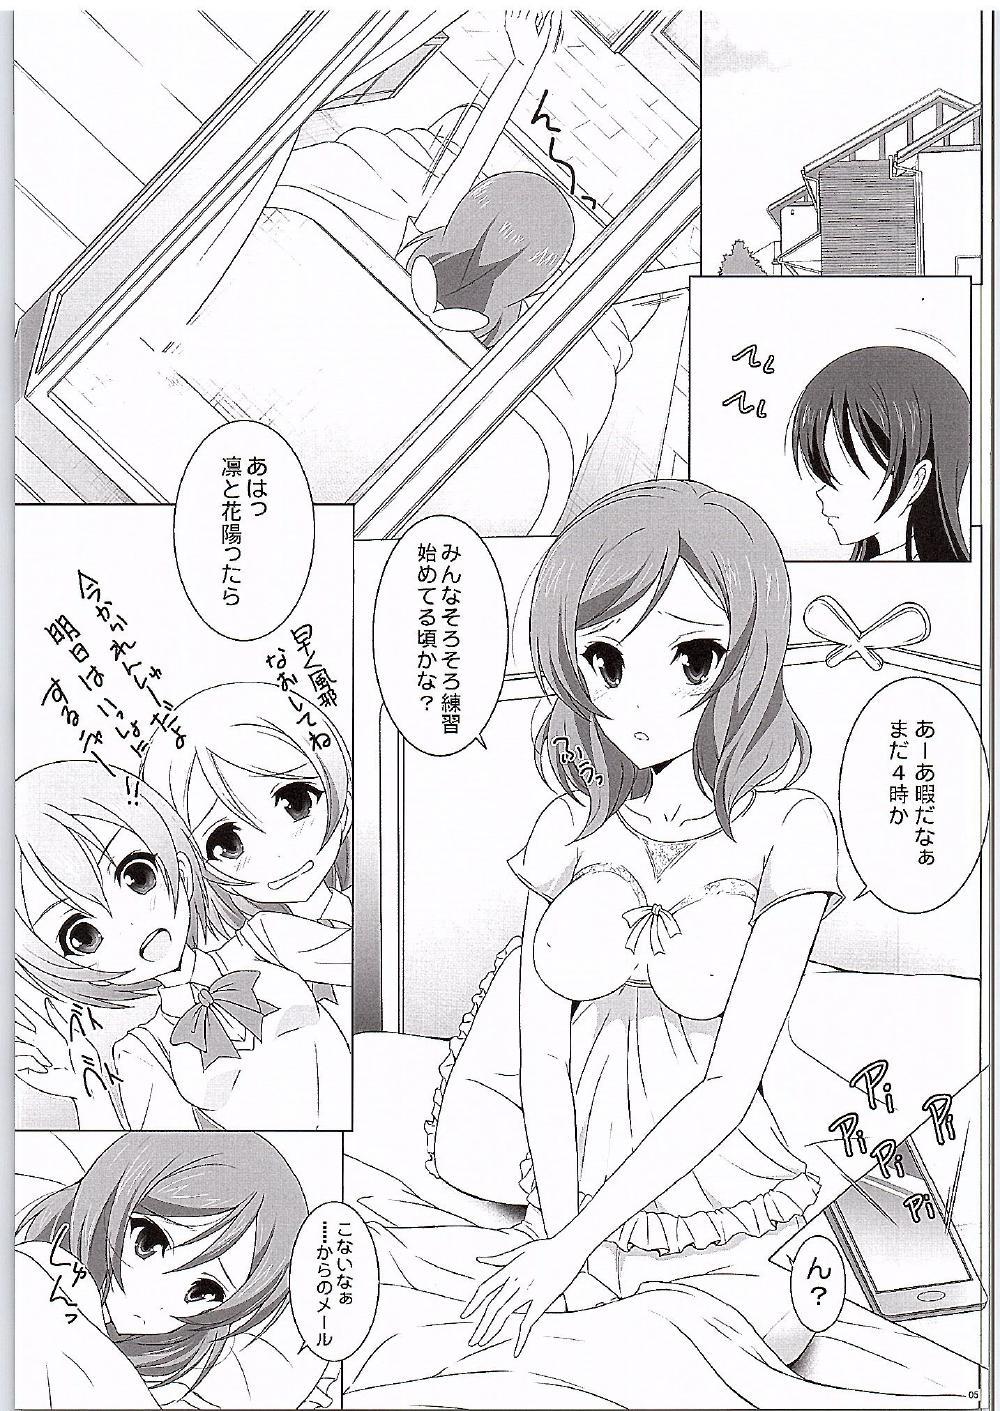 Hidden UmiMaki Roll - Love live White Girl - Page 4